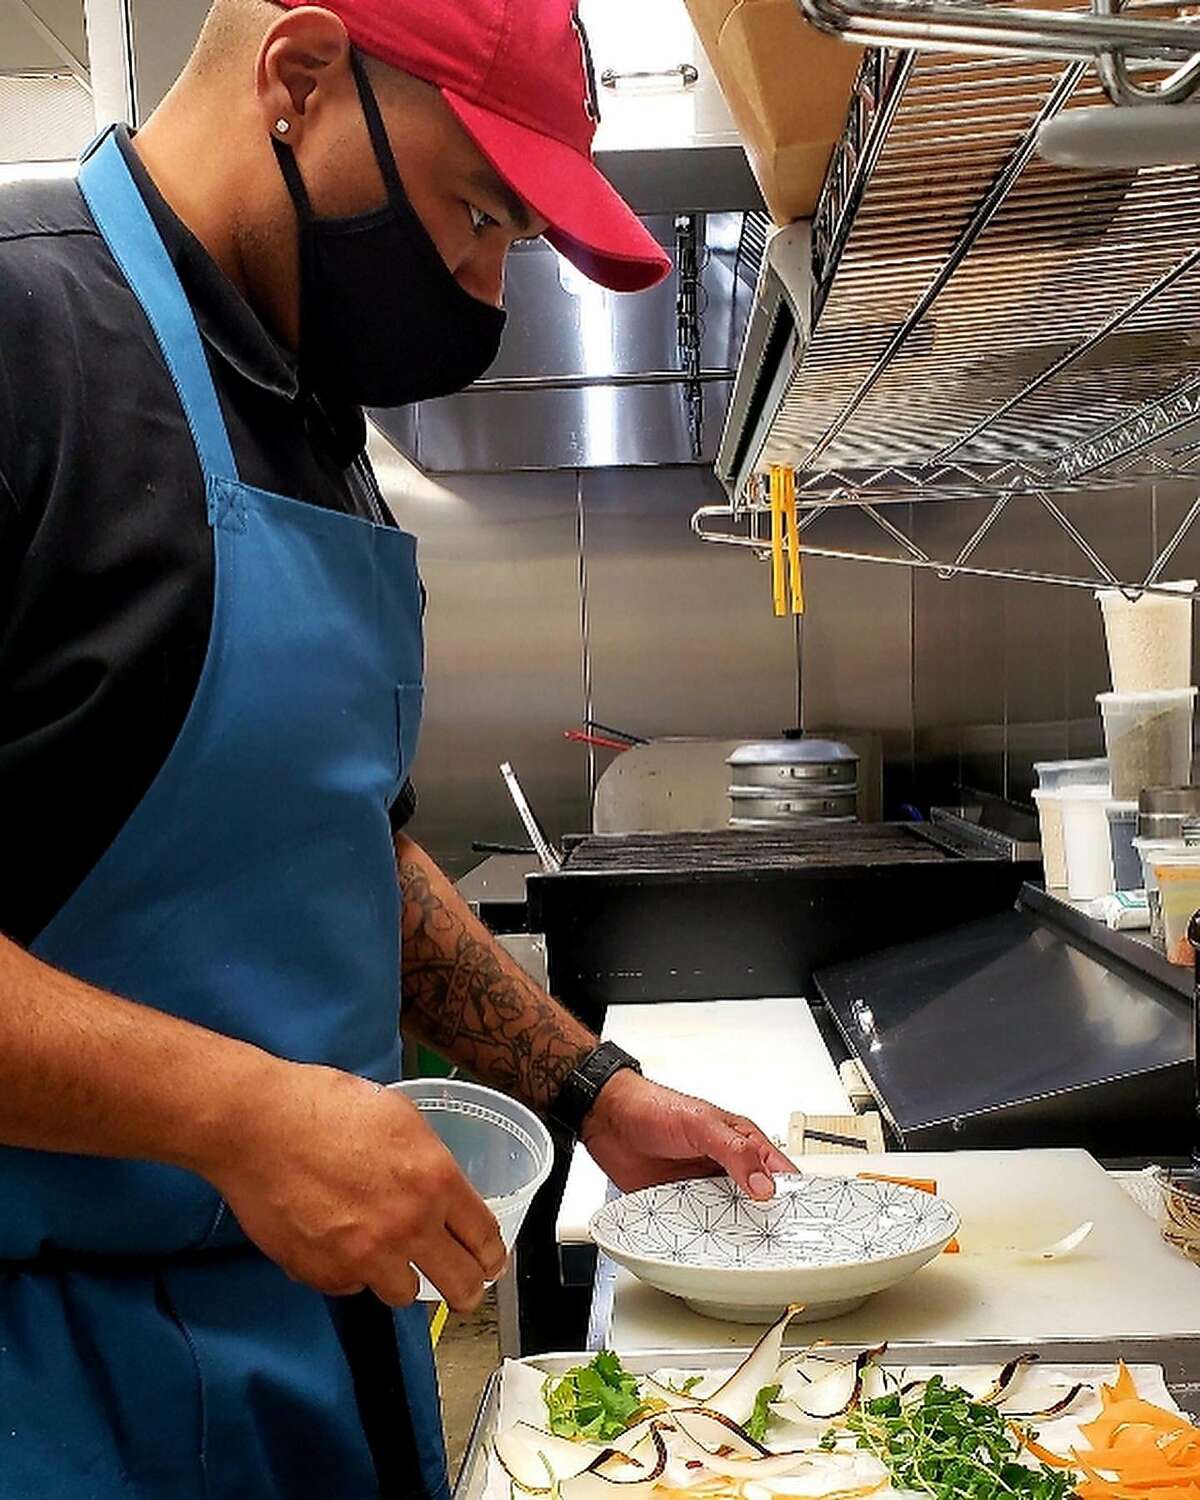 Edwin Bayone III prepares food at Bap, his new virtual kitchen. The executive chef of the modern Korean restaurant Um.ma in San Francisco operates out of a CloudKitchen space in the Bayview, it opened for takeout and delivery Feb. 1, 2021 with a focus on Korean rice dishes.